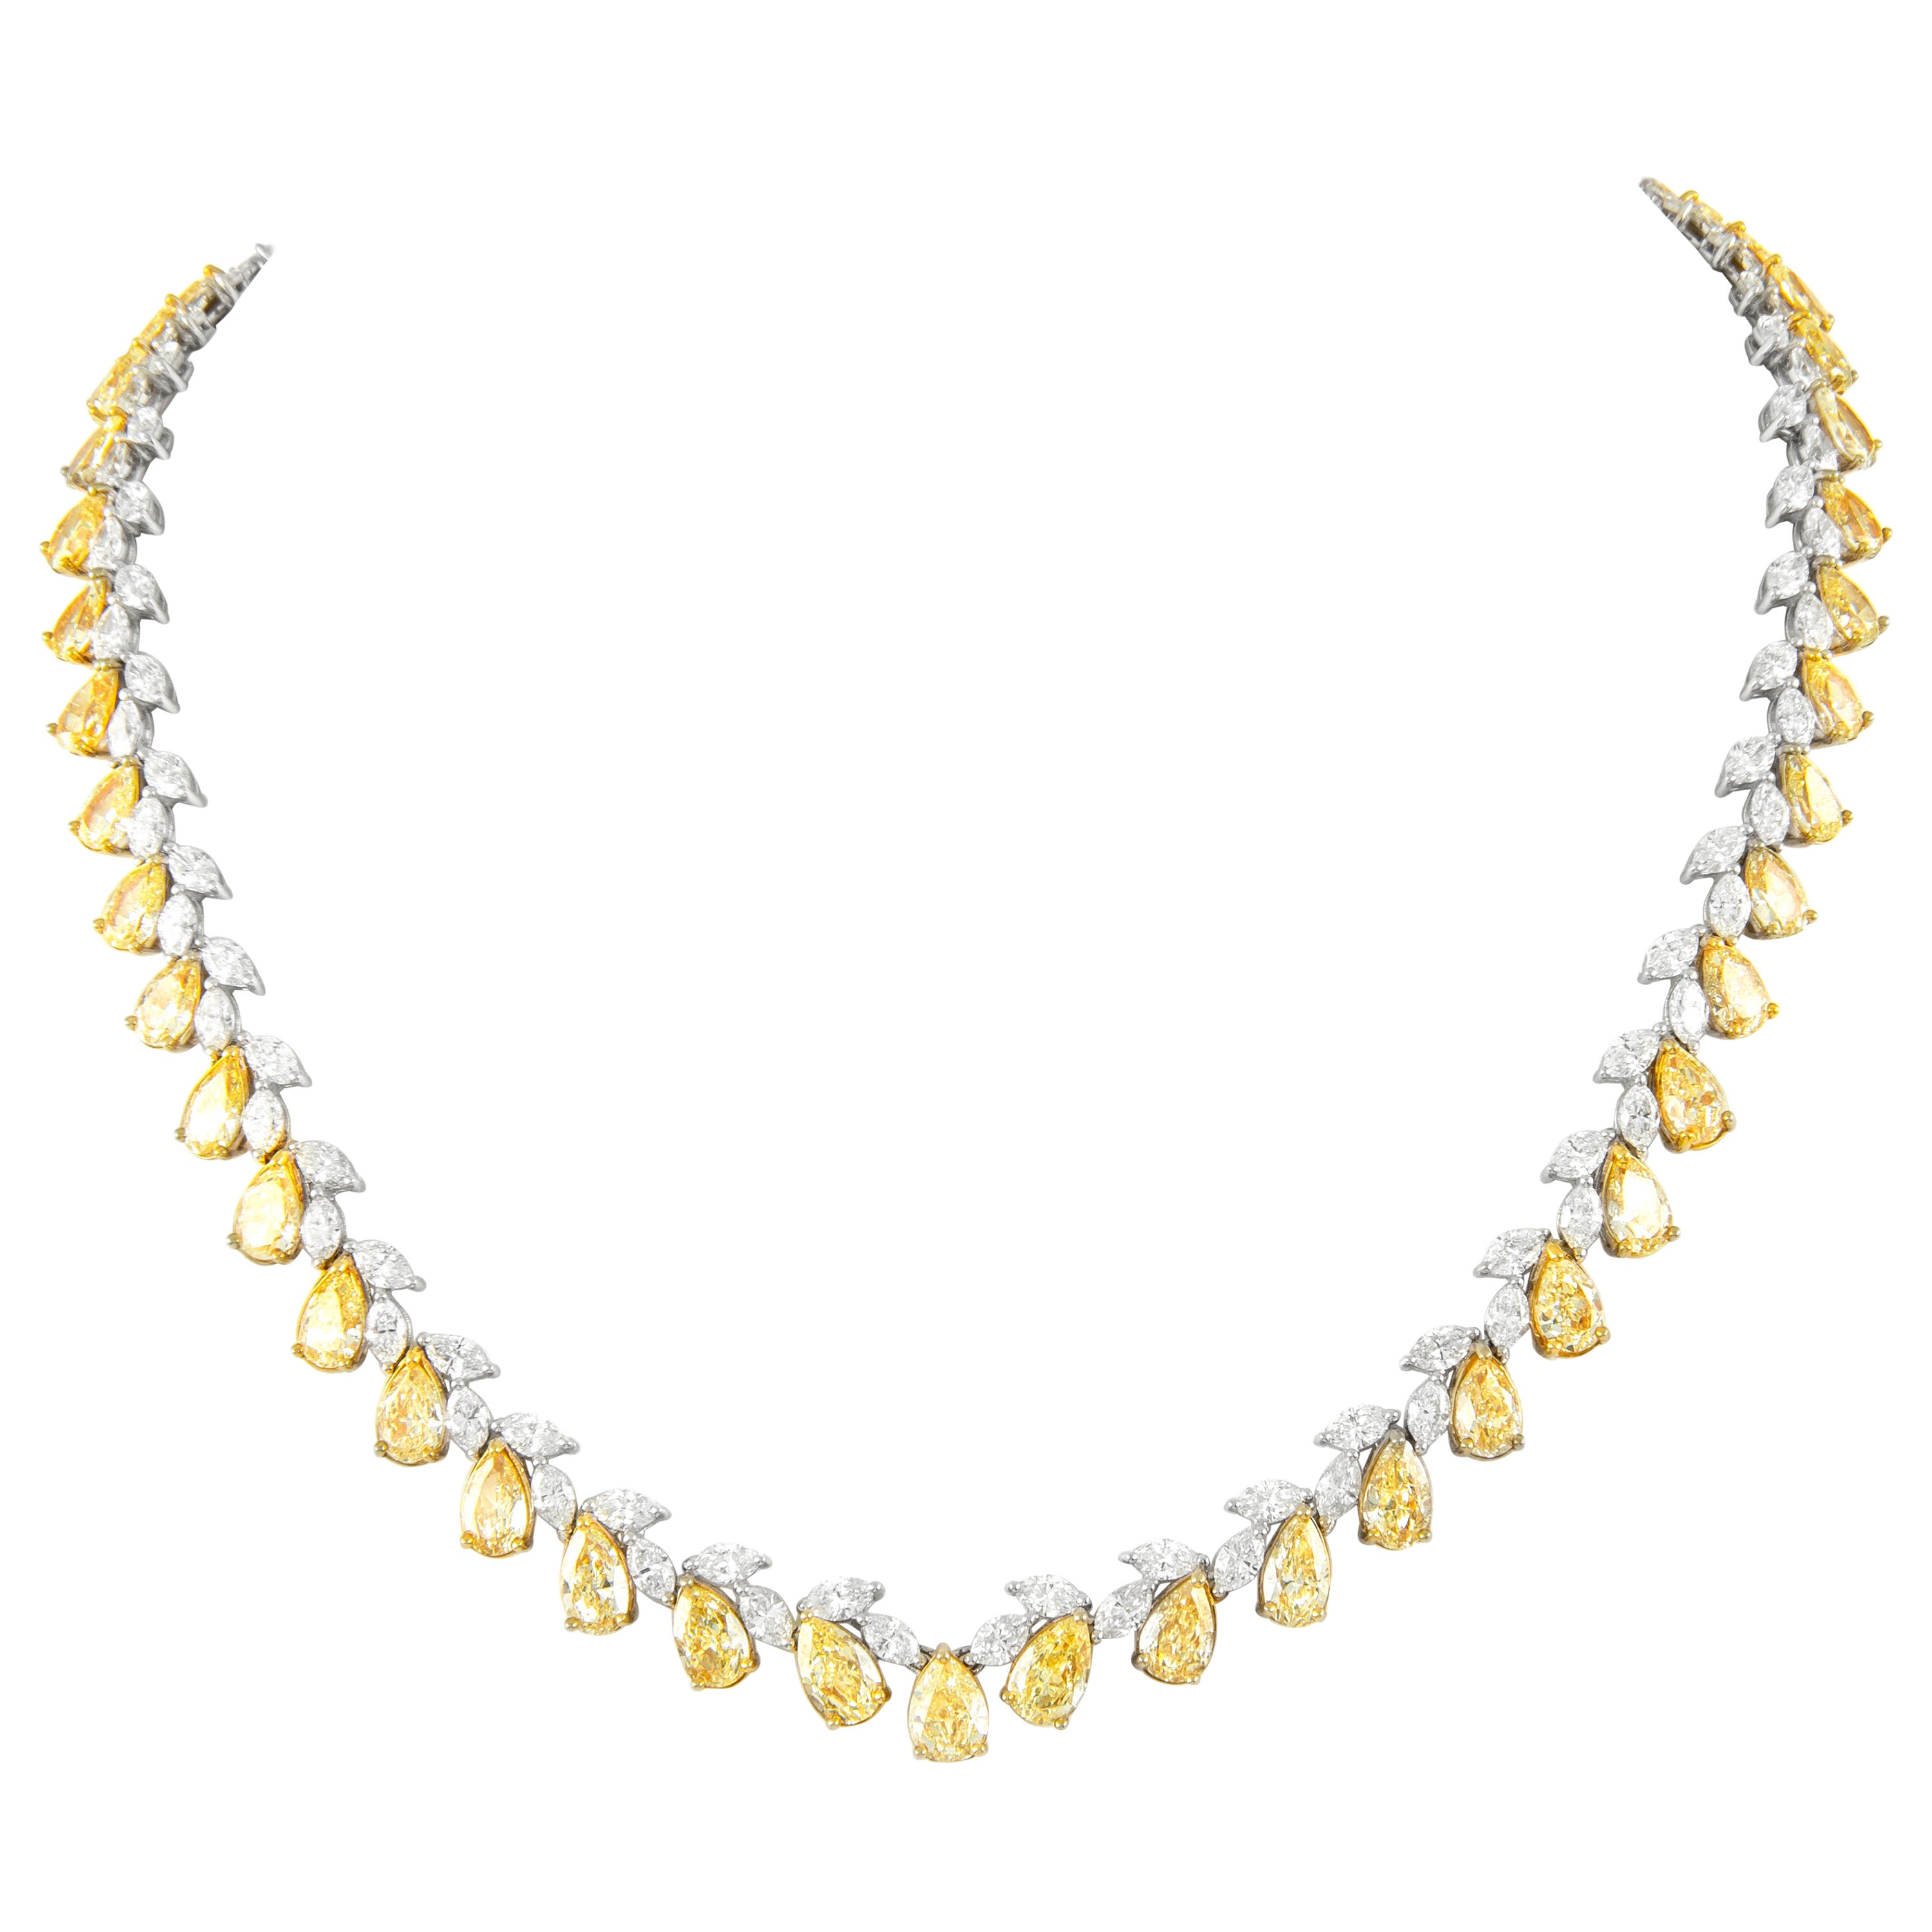 Alexander 50.14 Yellow and White Diamond Necklace 18k White & YellowGold For Sale